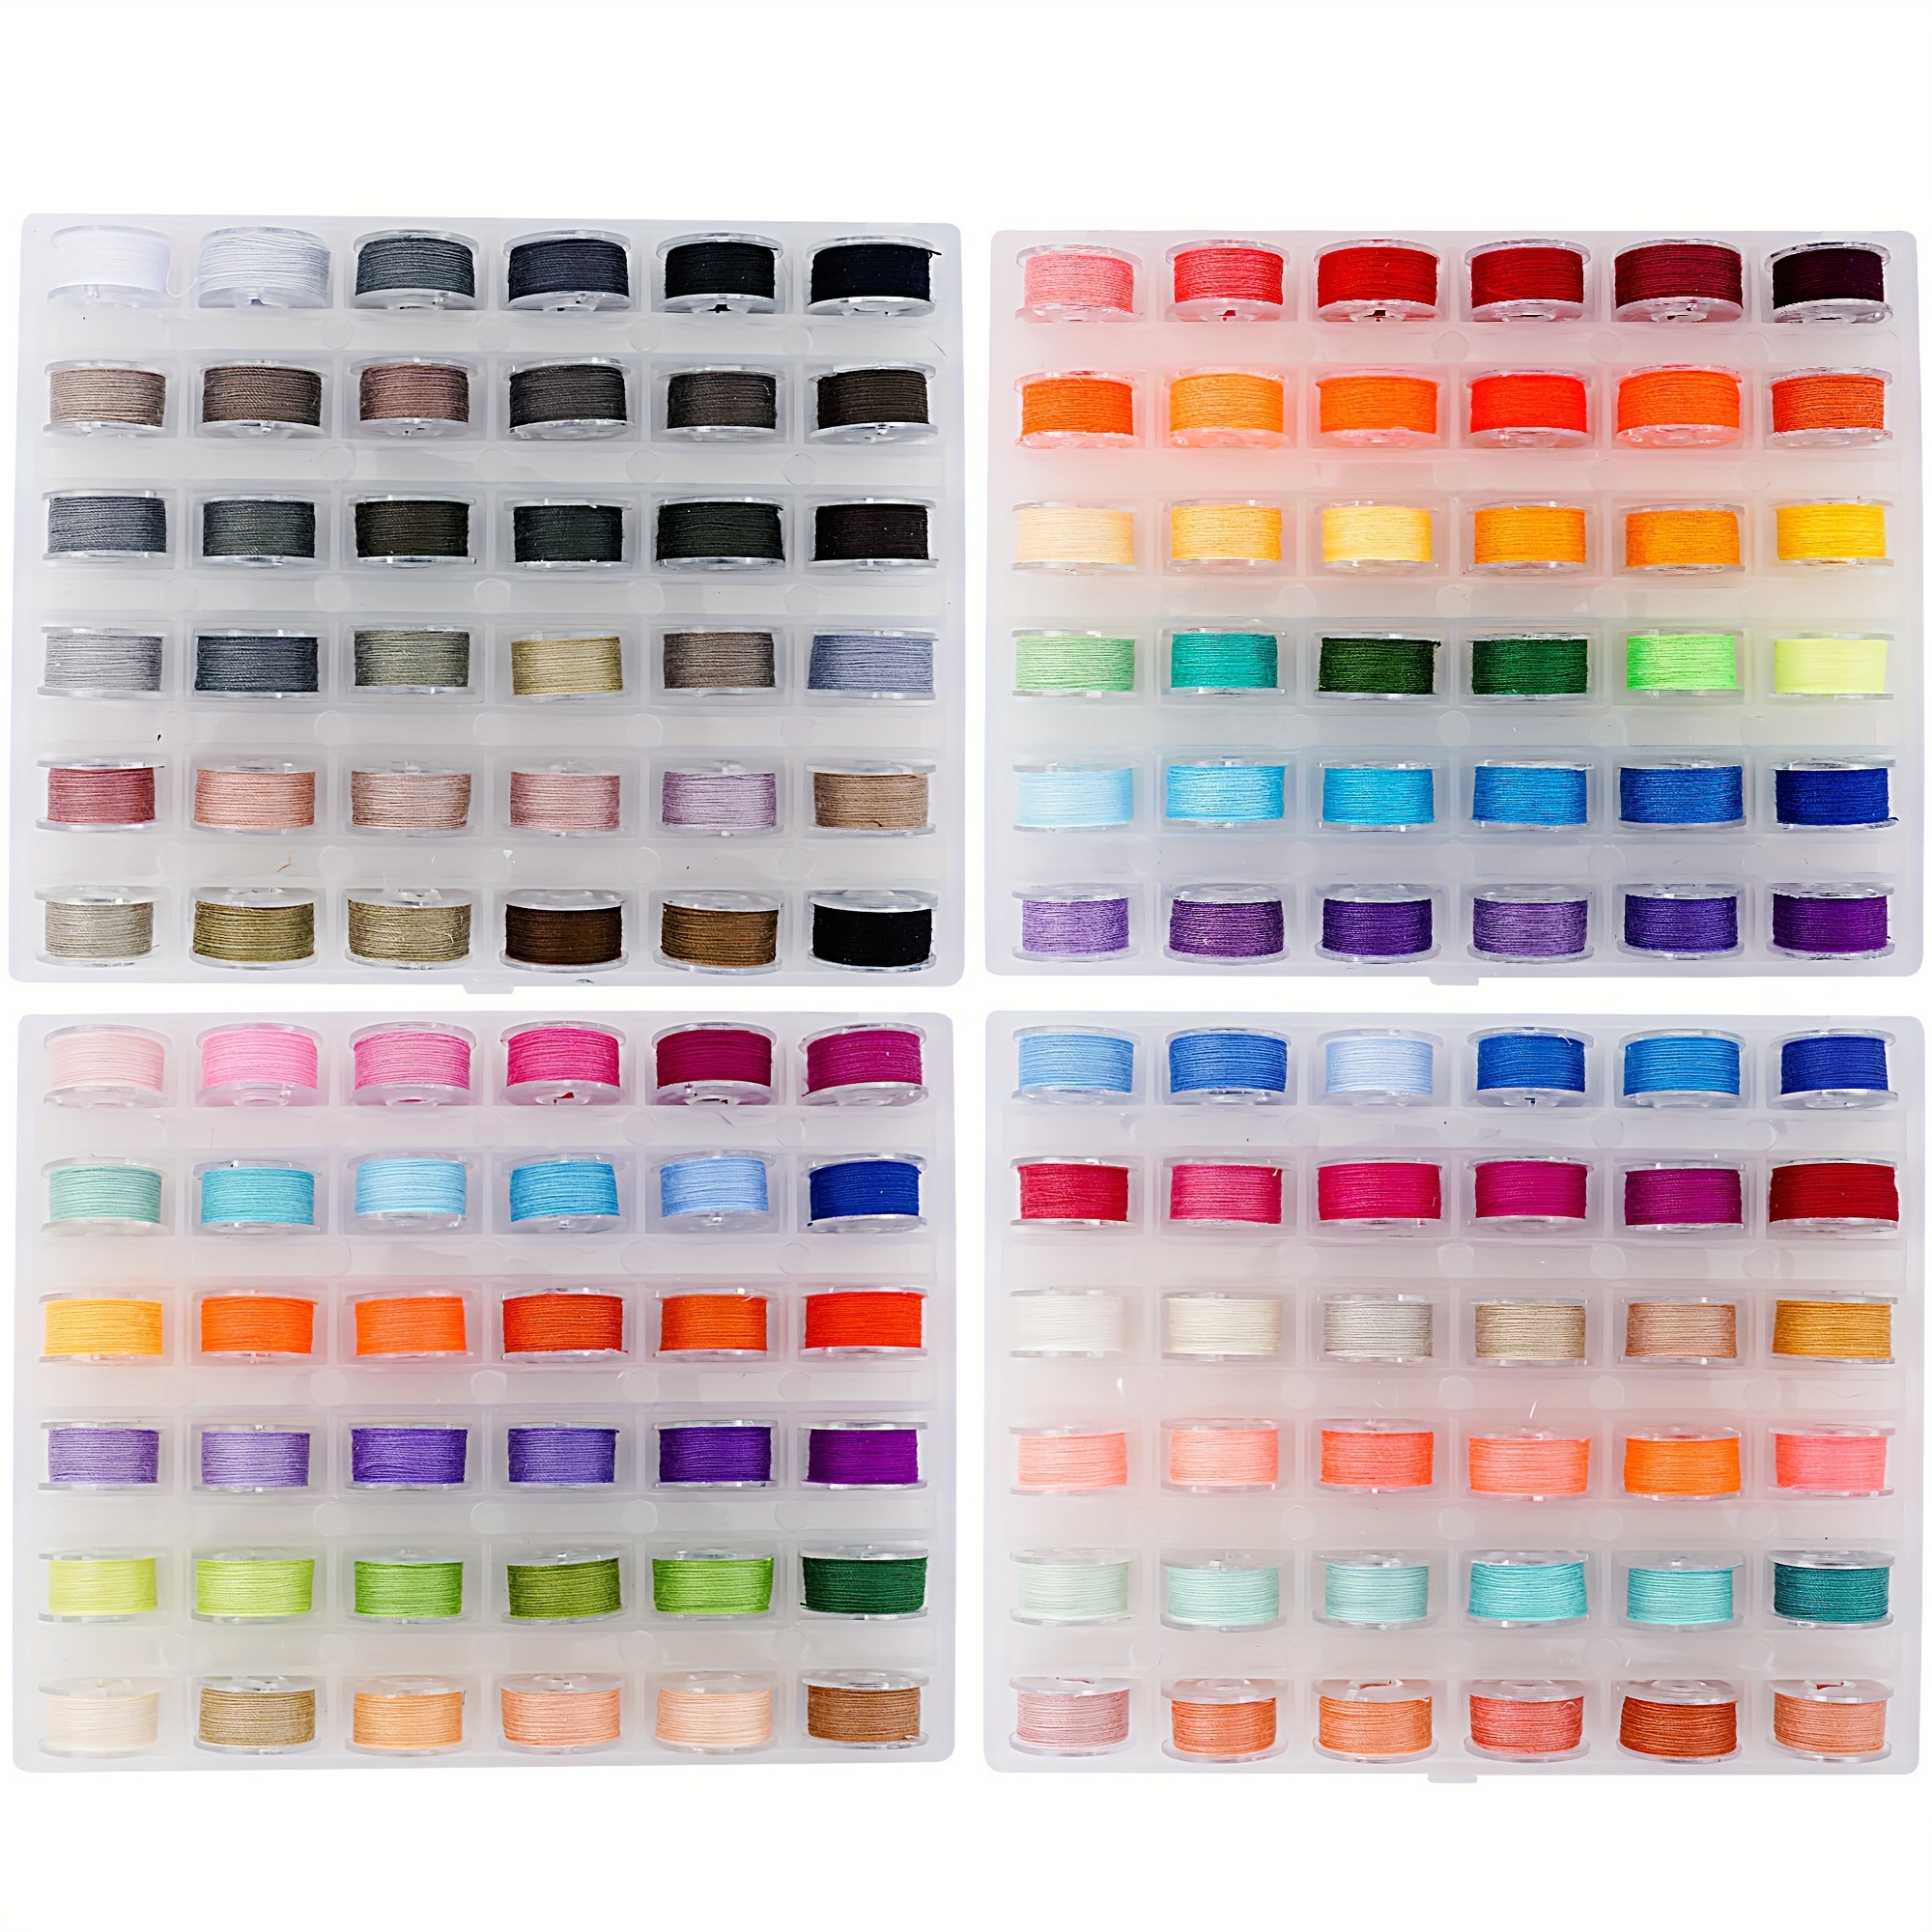 

36colors 4 Box Prewound Bobbins Kit Bobbins With Thread For Sewing Machine And Hand Stitching Use